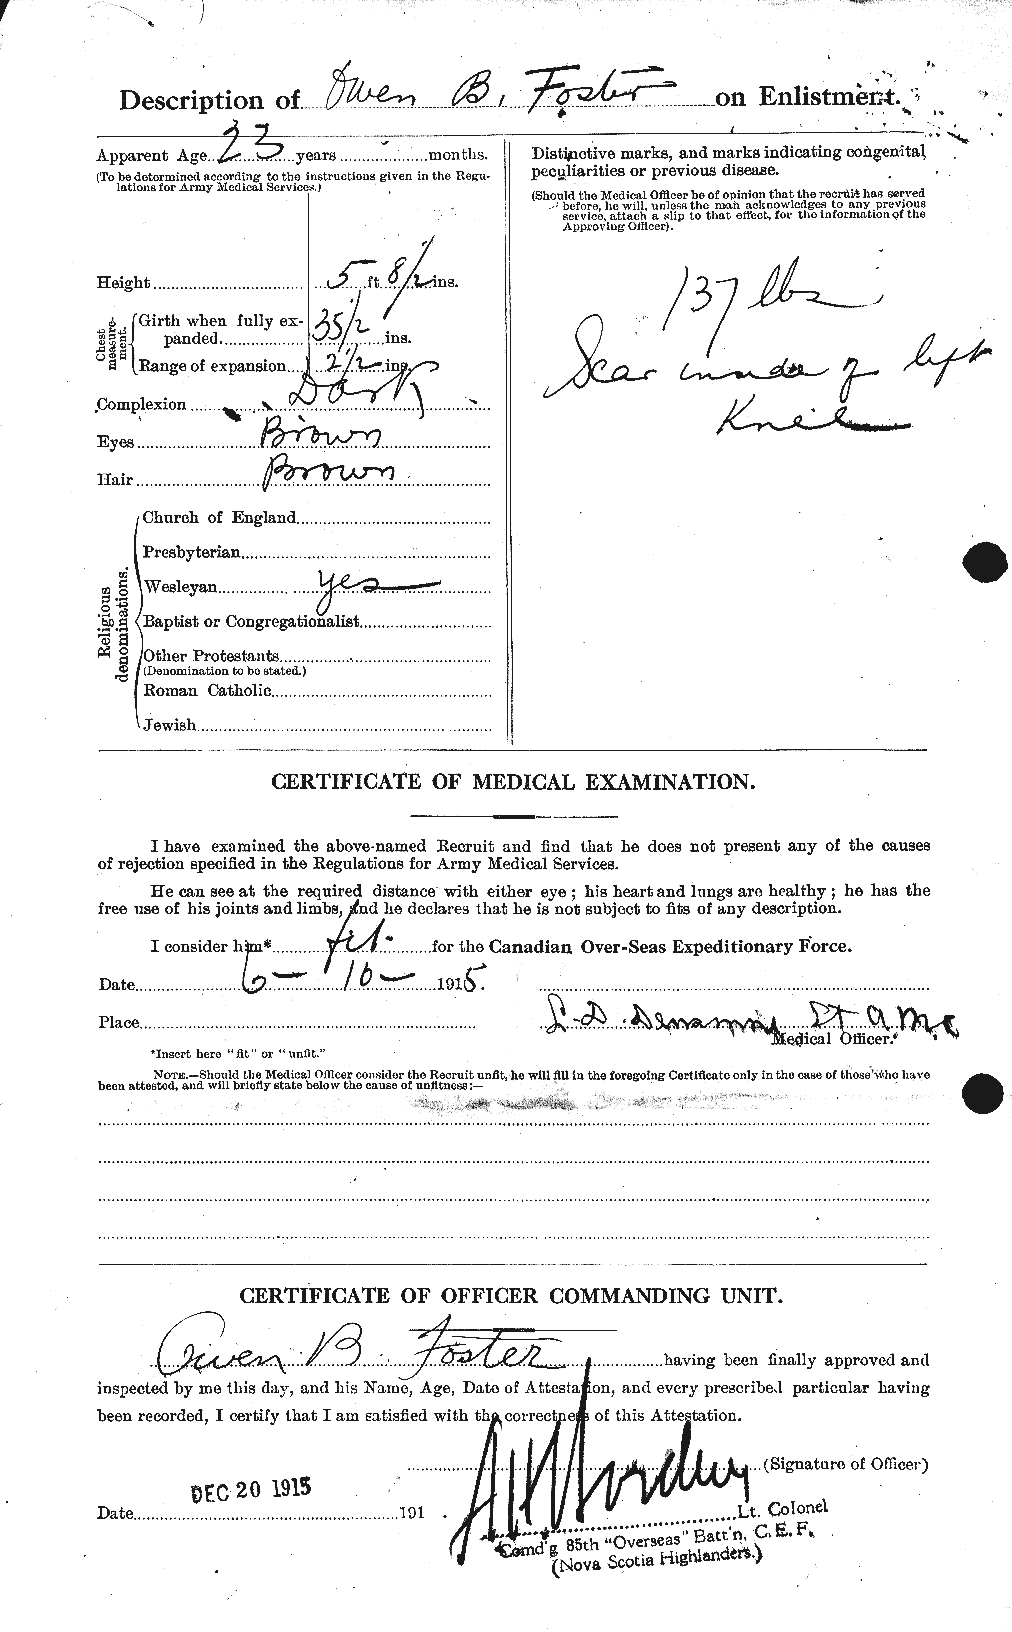 Personnel Records of the First World War - CEF 333437b